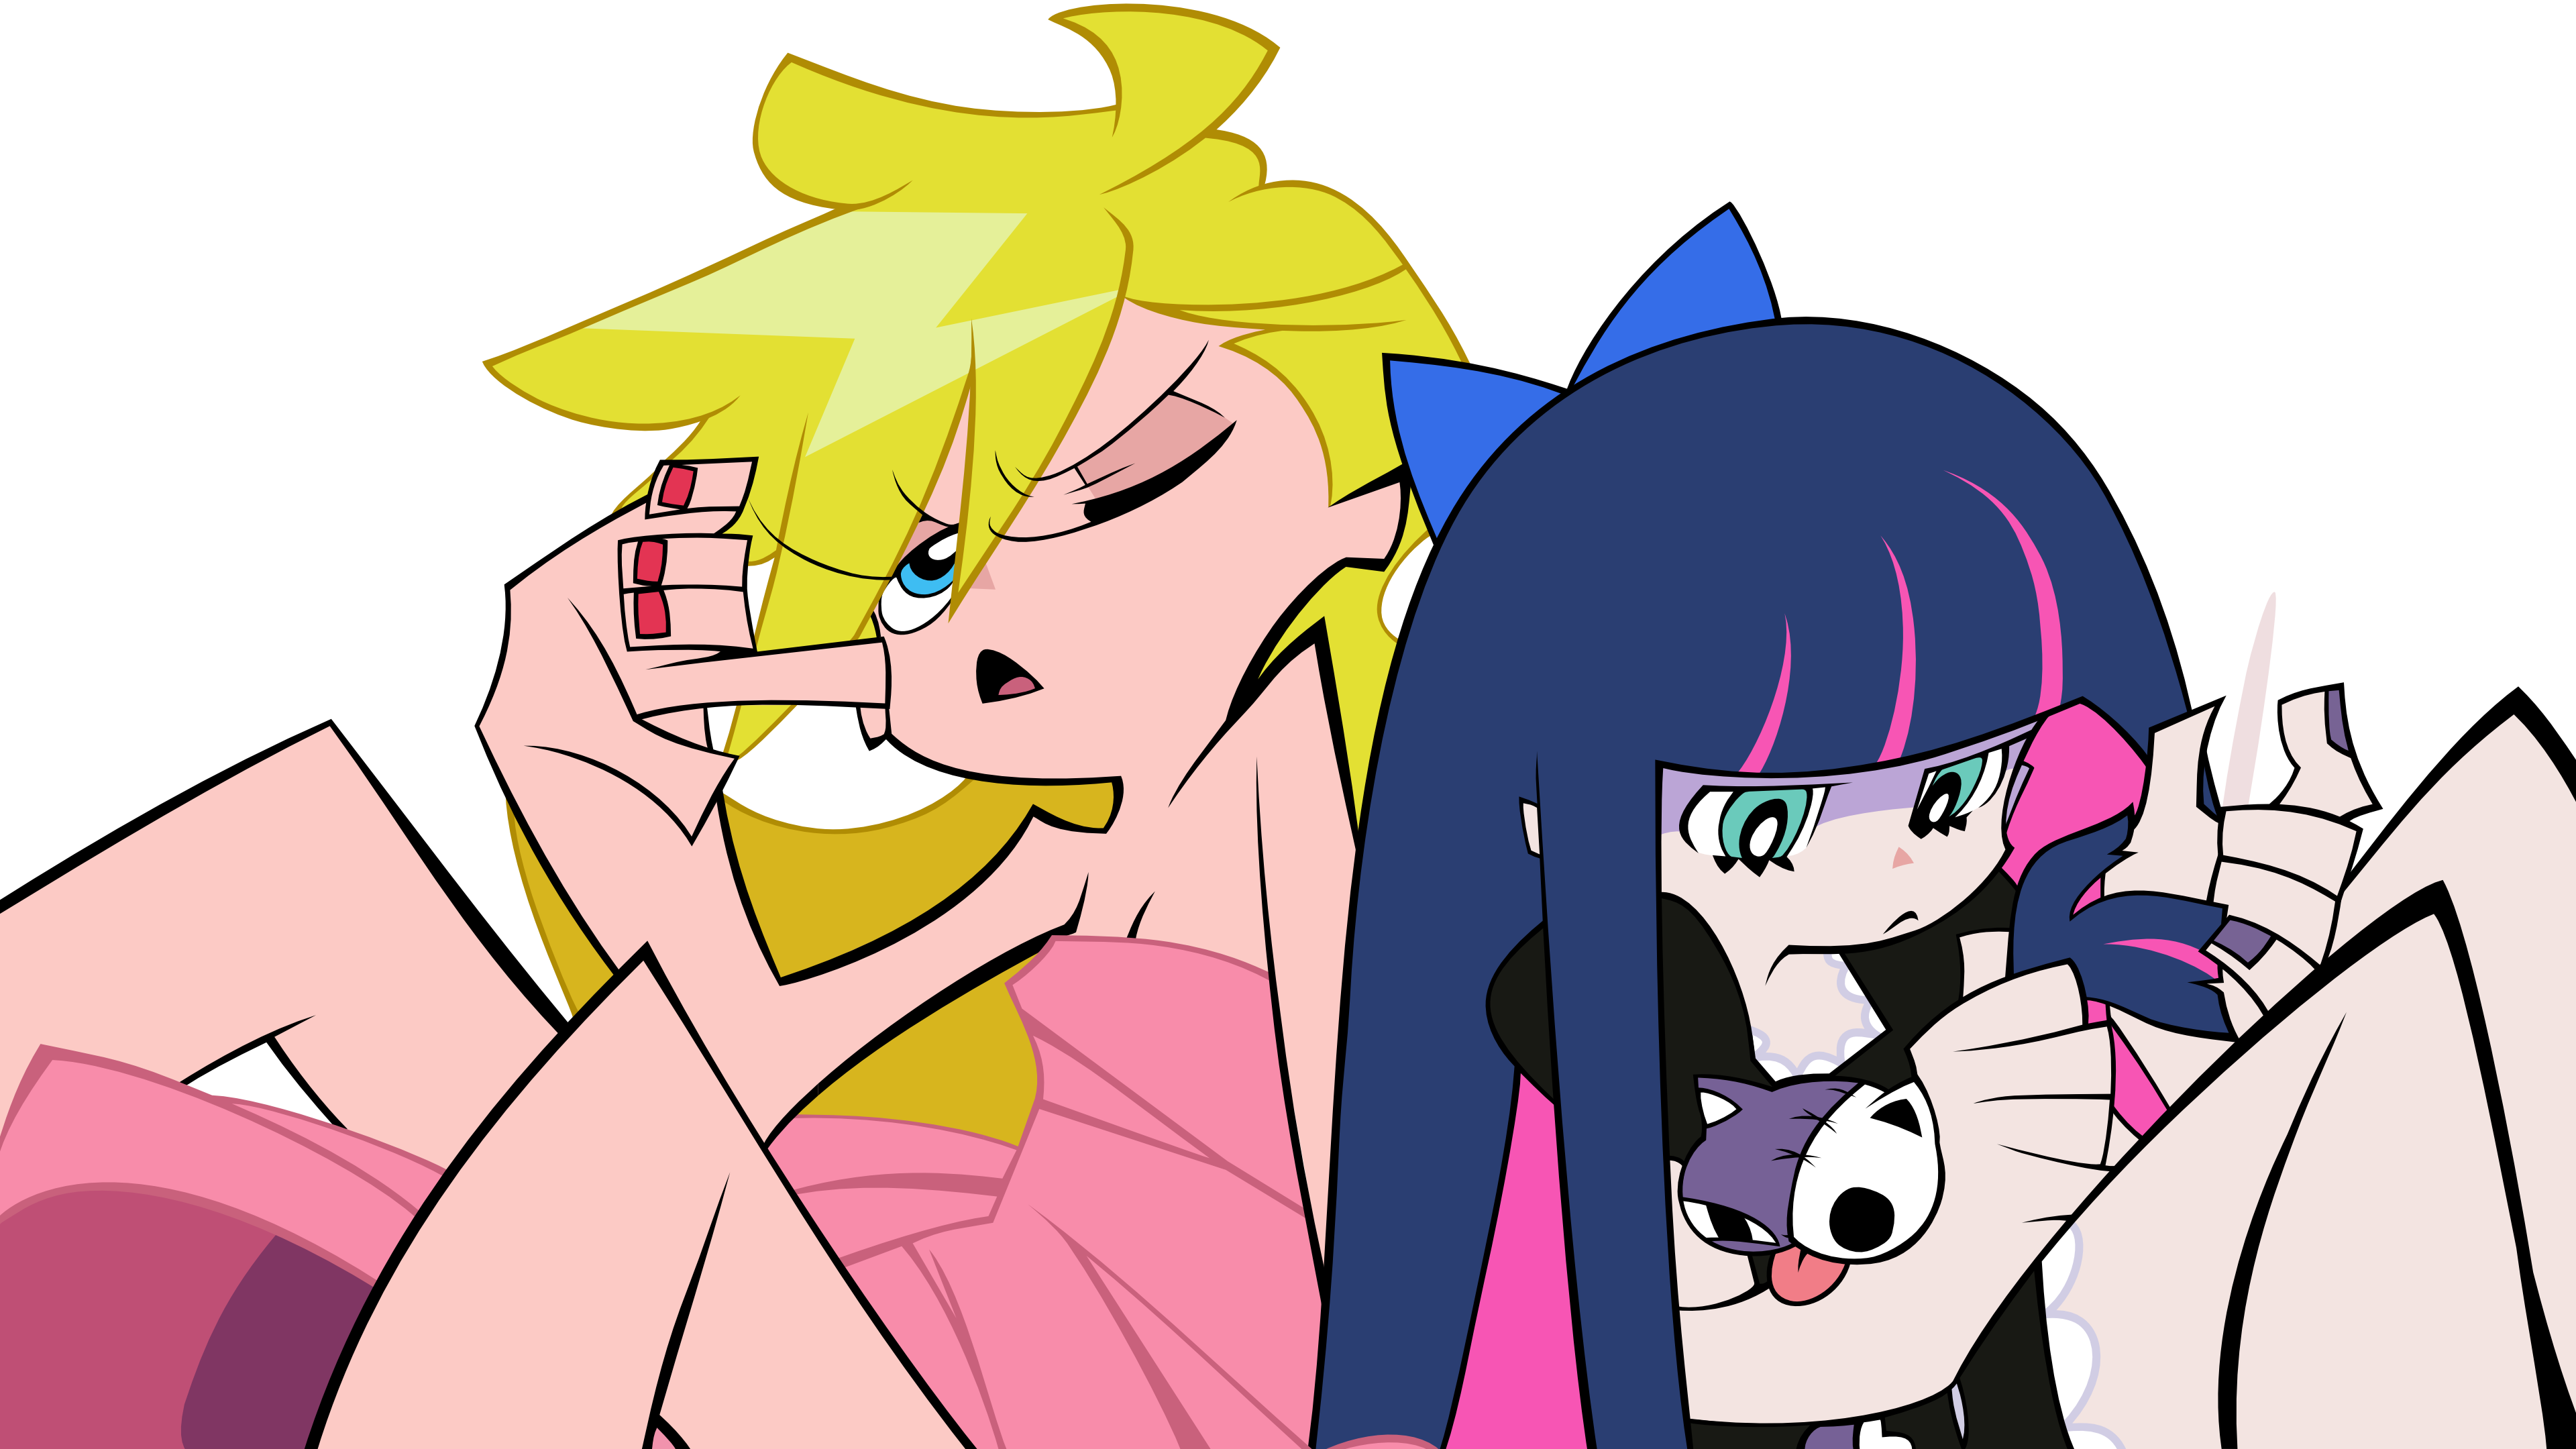 Panty and stocking teaser